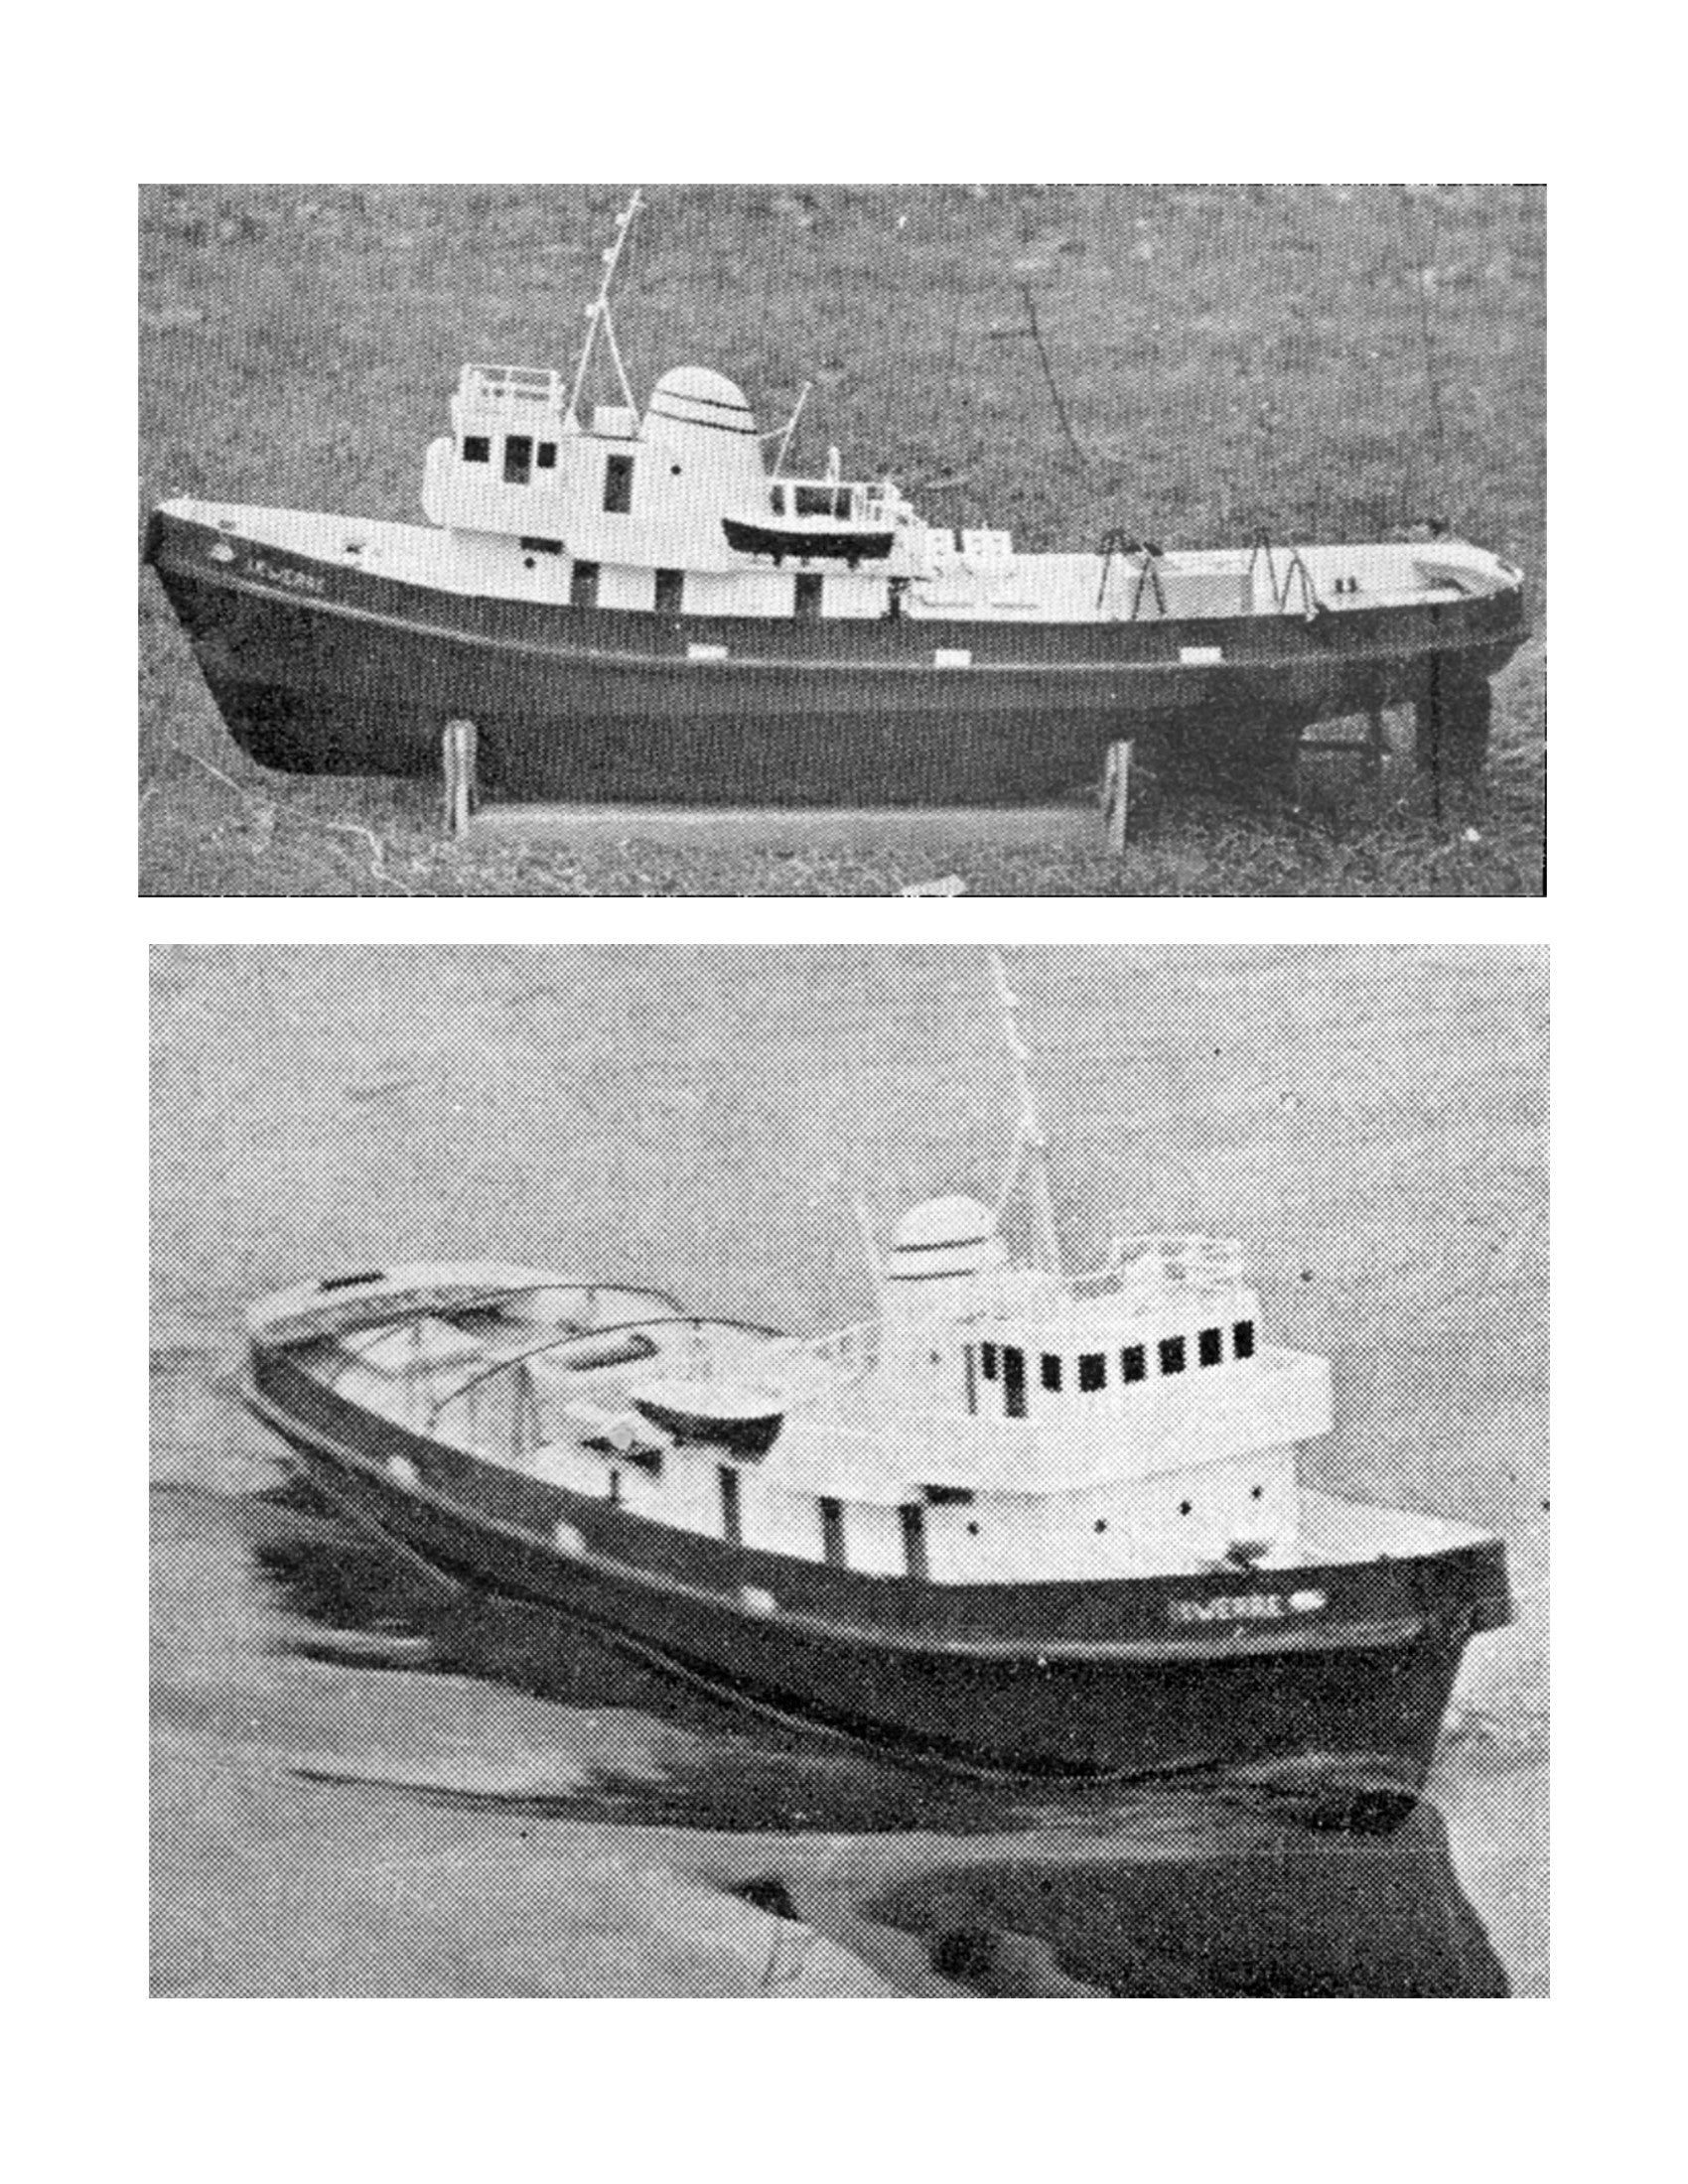 full size printed plans scale 1/47.2. thornycroft fire boat tug  suitable for radio control